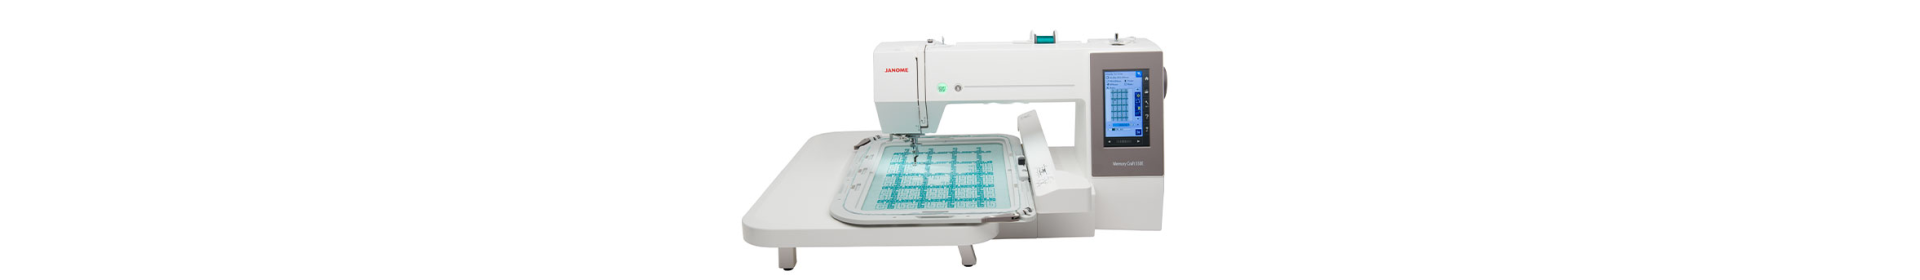 Janome 550e Floor Model embroidery sewing machine